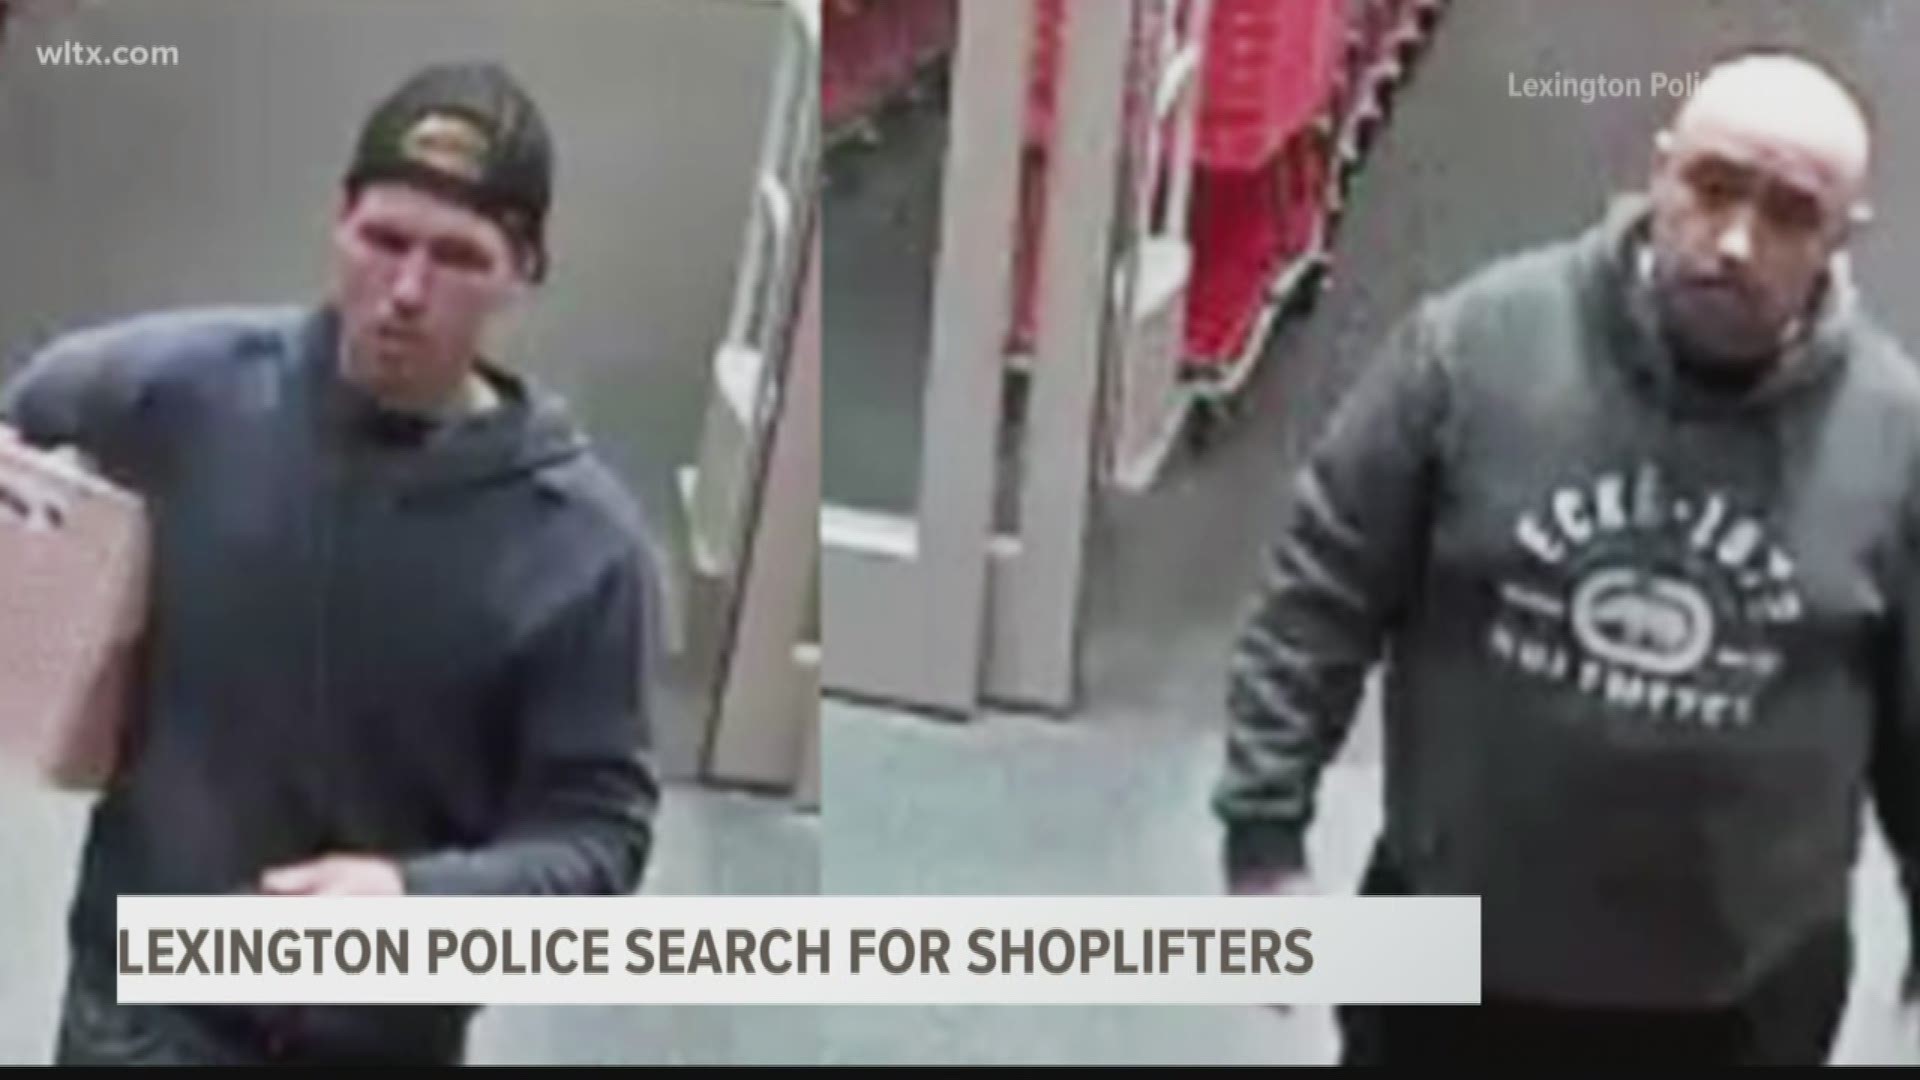 Two men allegedly took items from Target on Sunset Boulevard.